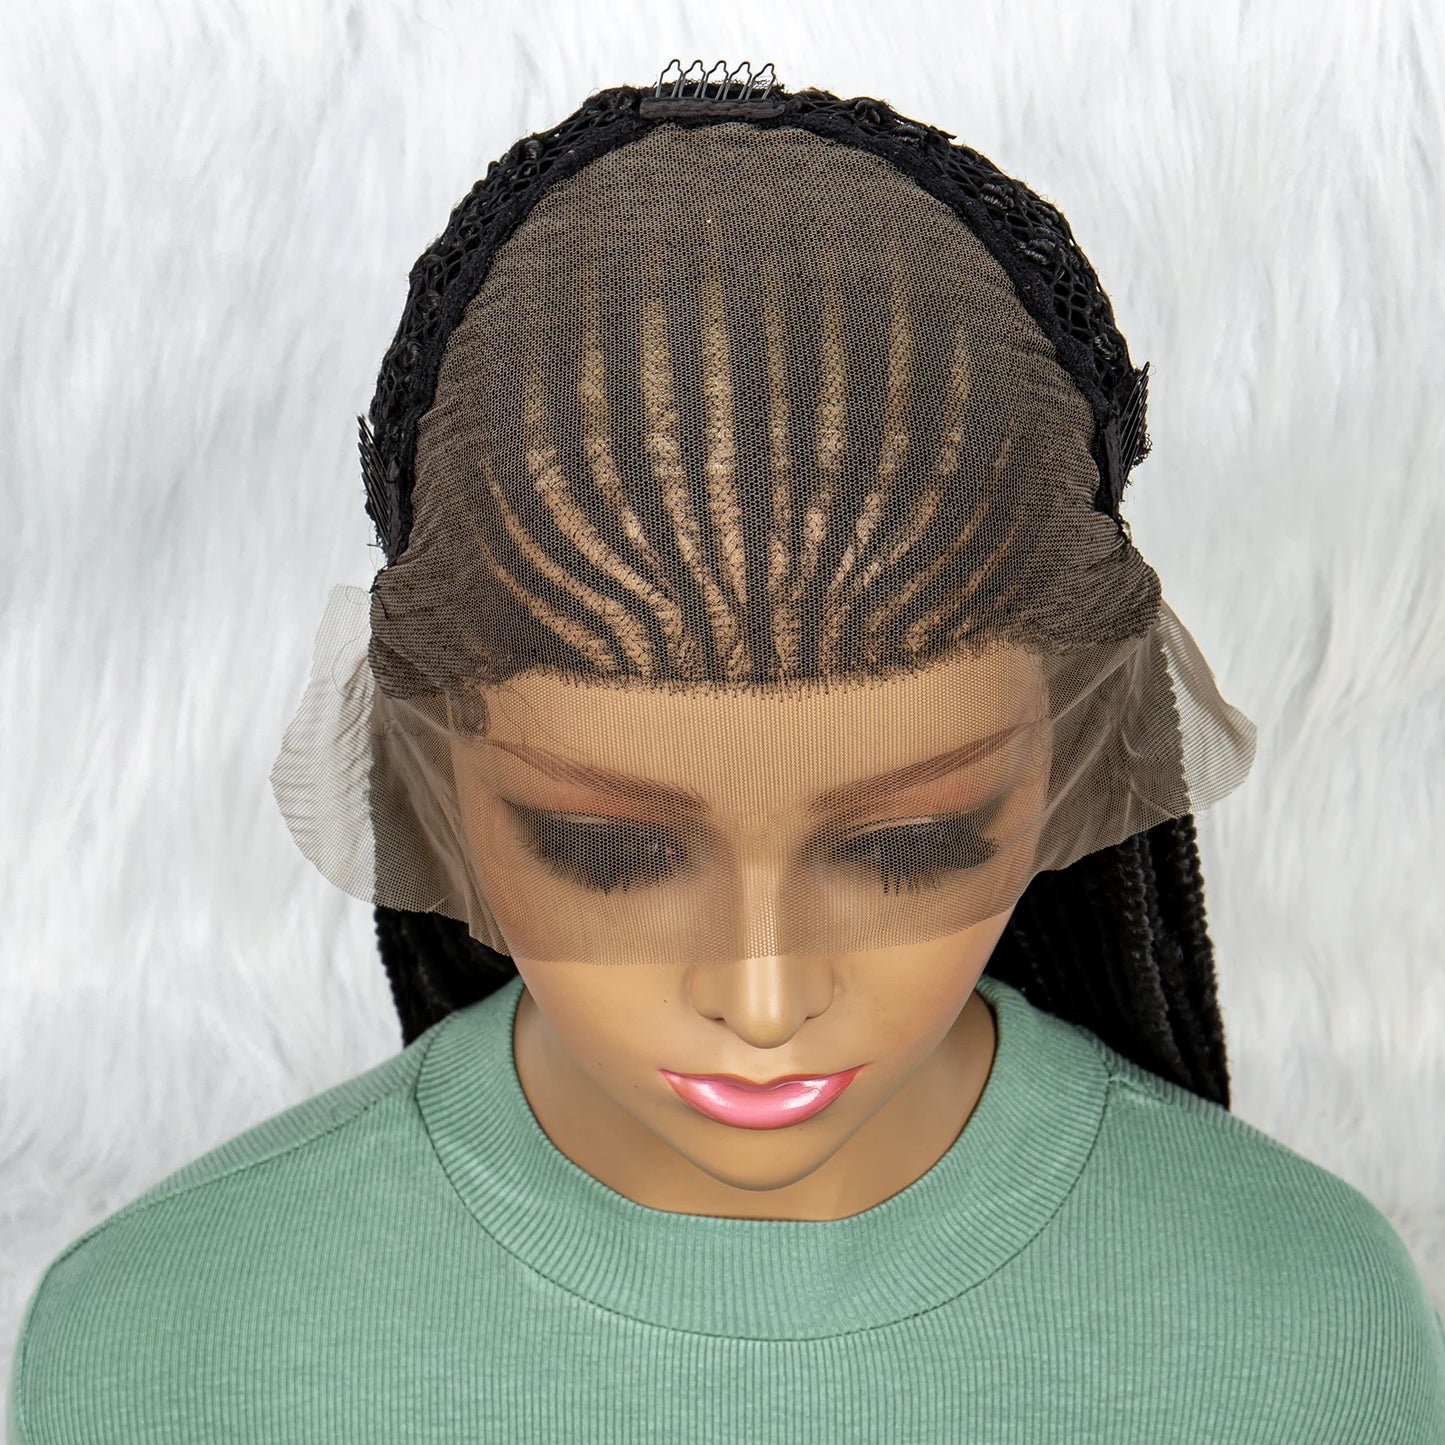 Synthetic Lace Front Wigs,13x6 Transparent Lace Front Braid Wig With Baby Hair